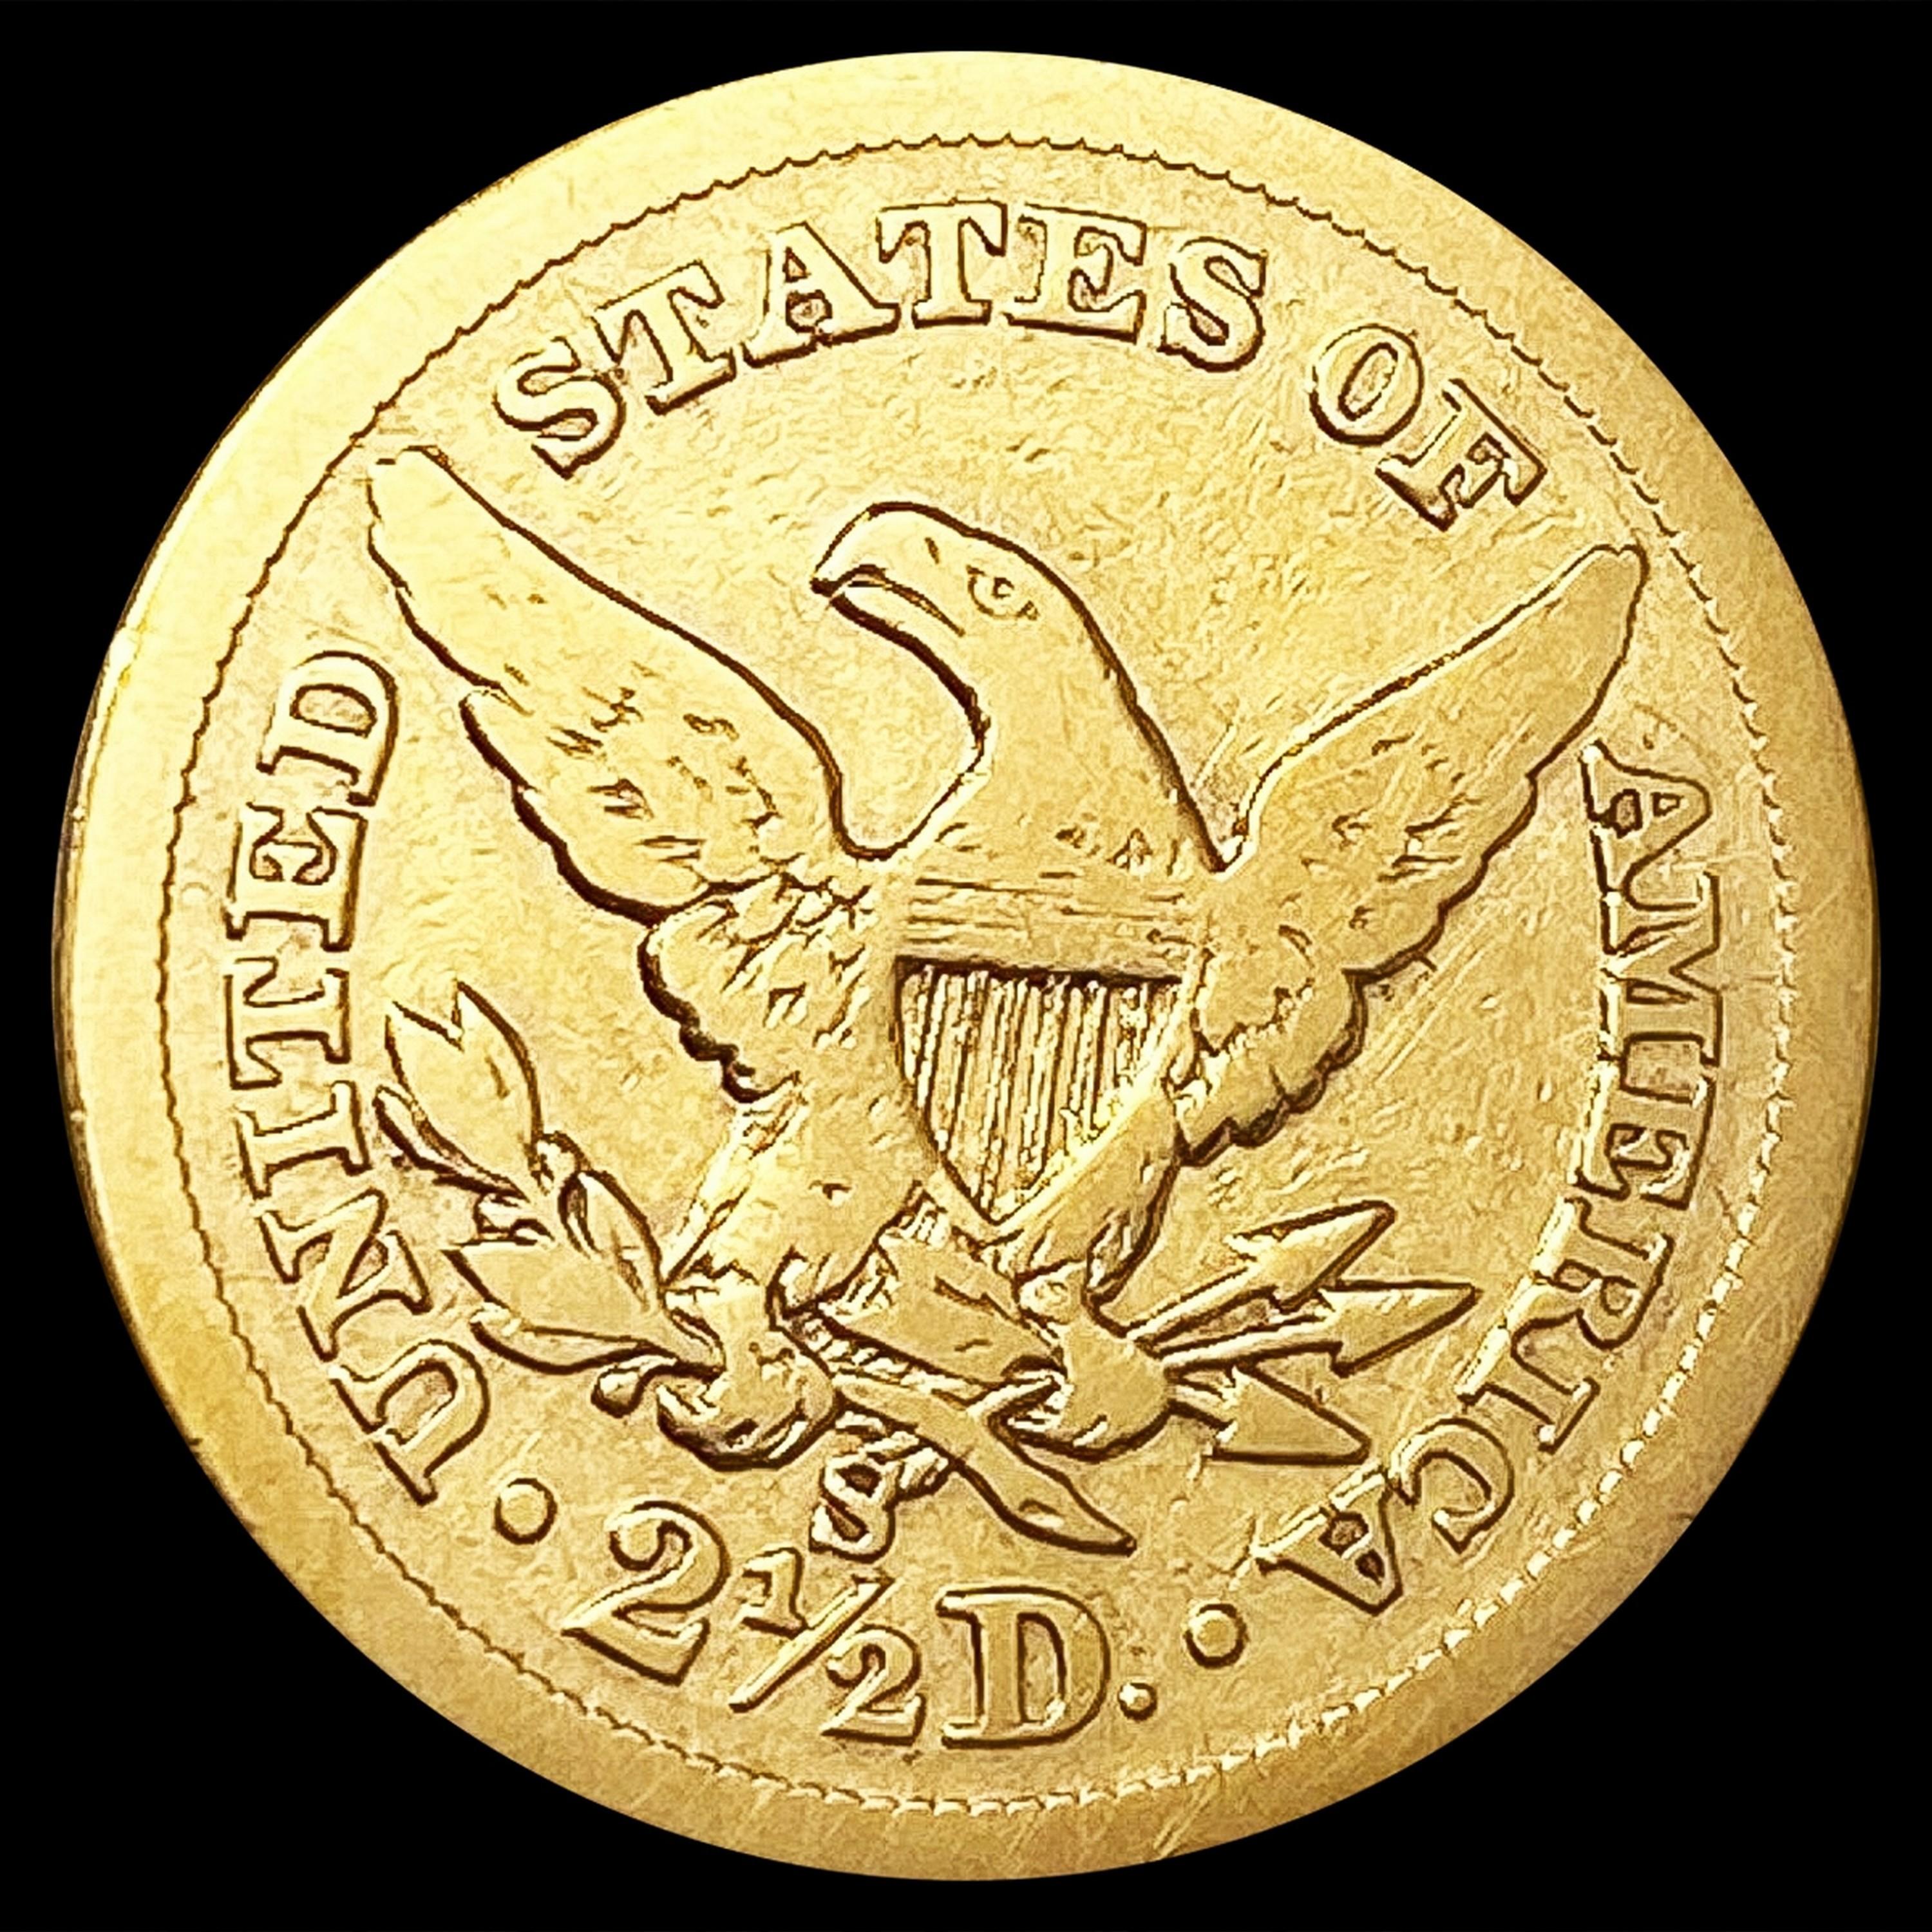 1872-S $2.50 Gold Quarter Eagle NICELY CIRCULATED